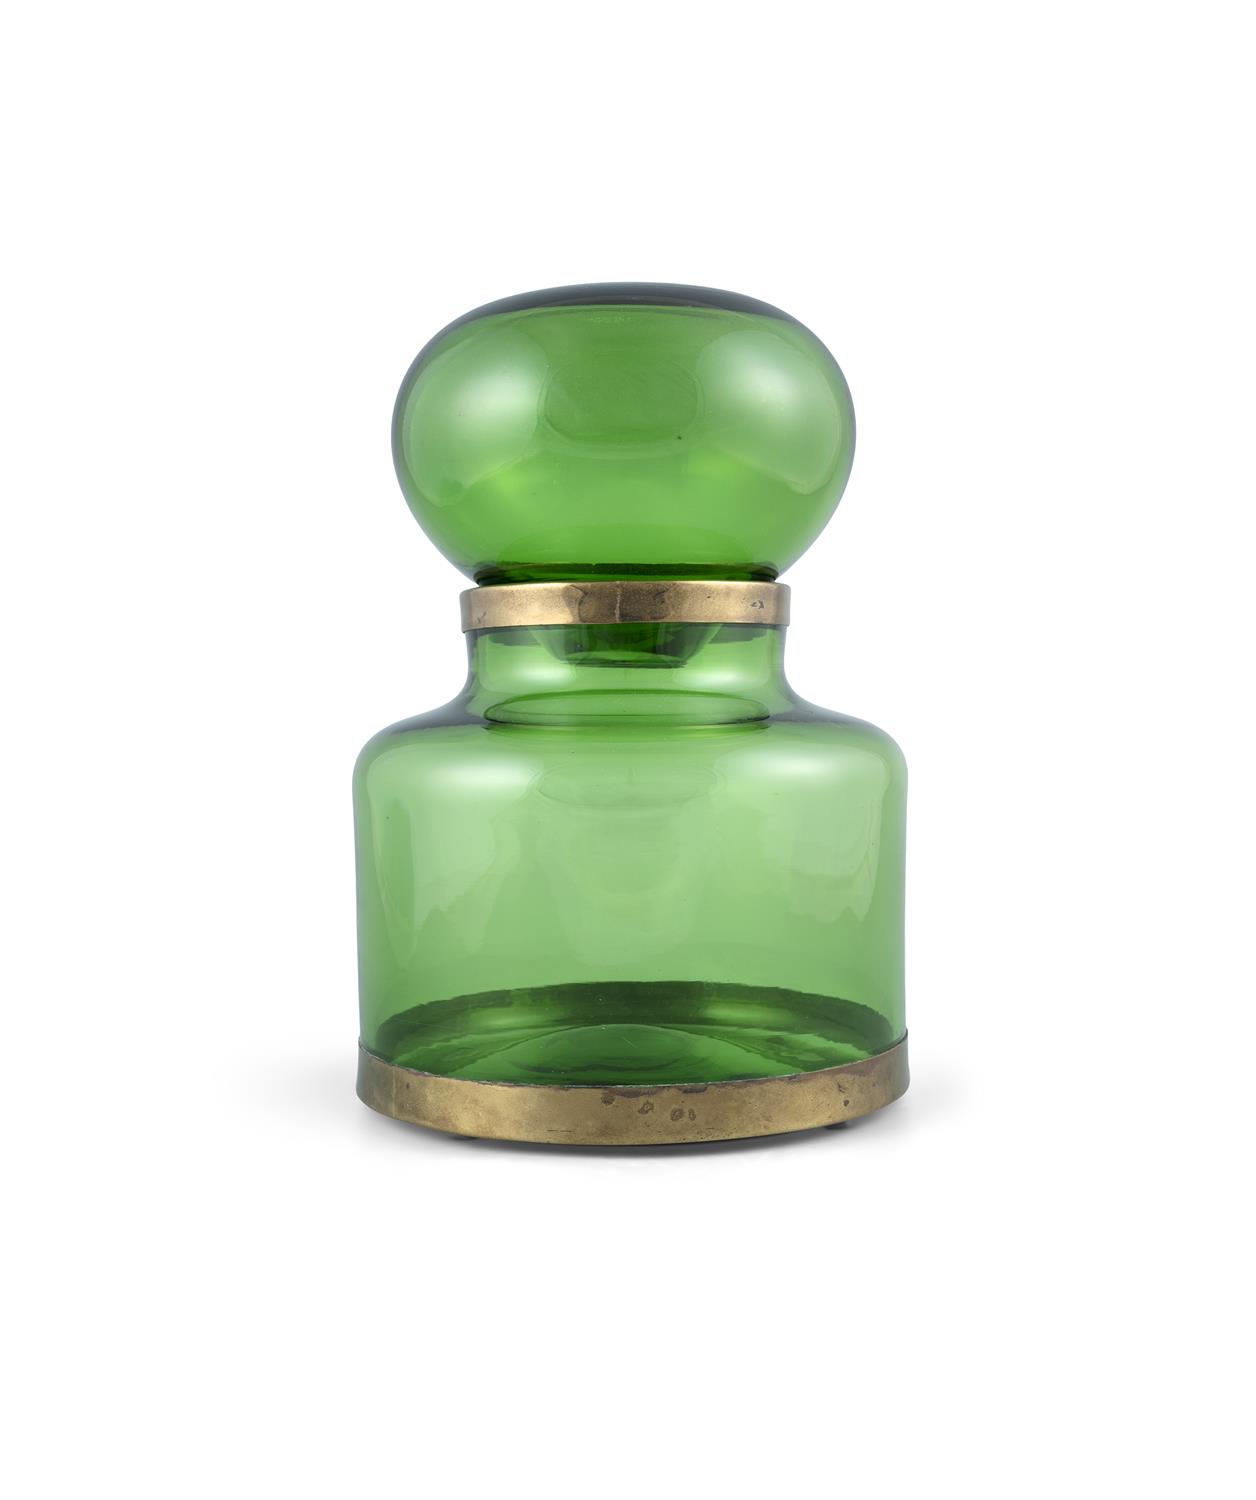 GLASS JAR A green glass jar with lid and brass detailing, Italy c.1960. 34 x 24 x 24cm